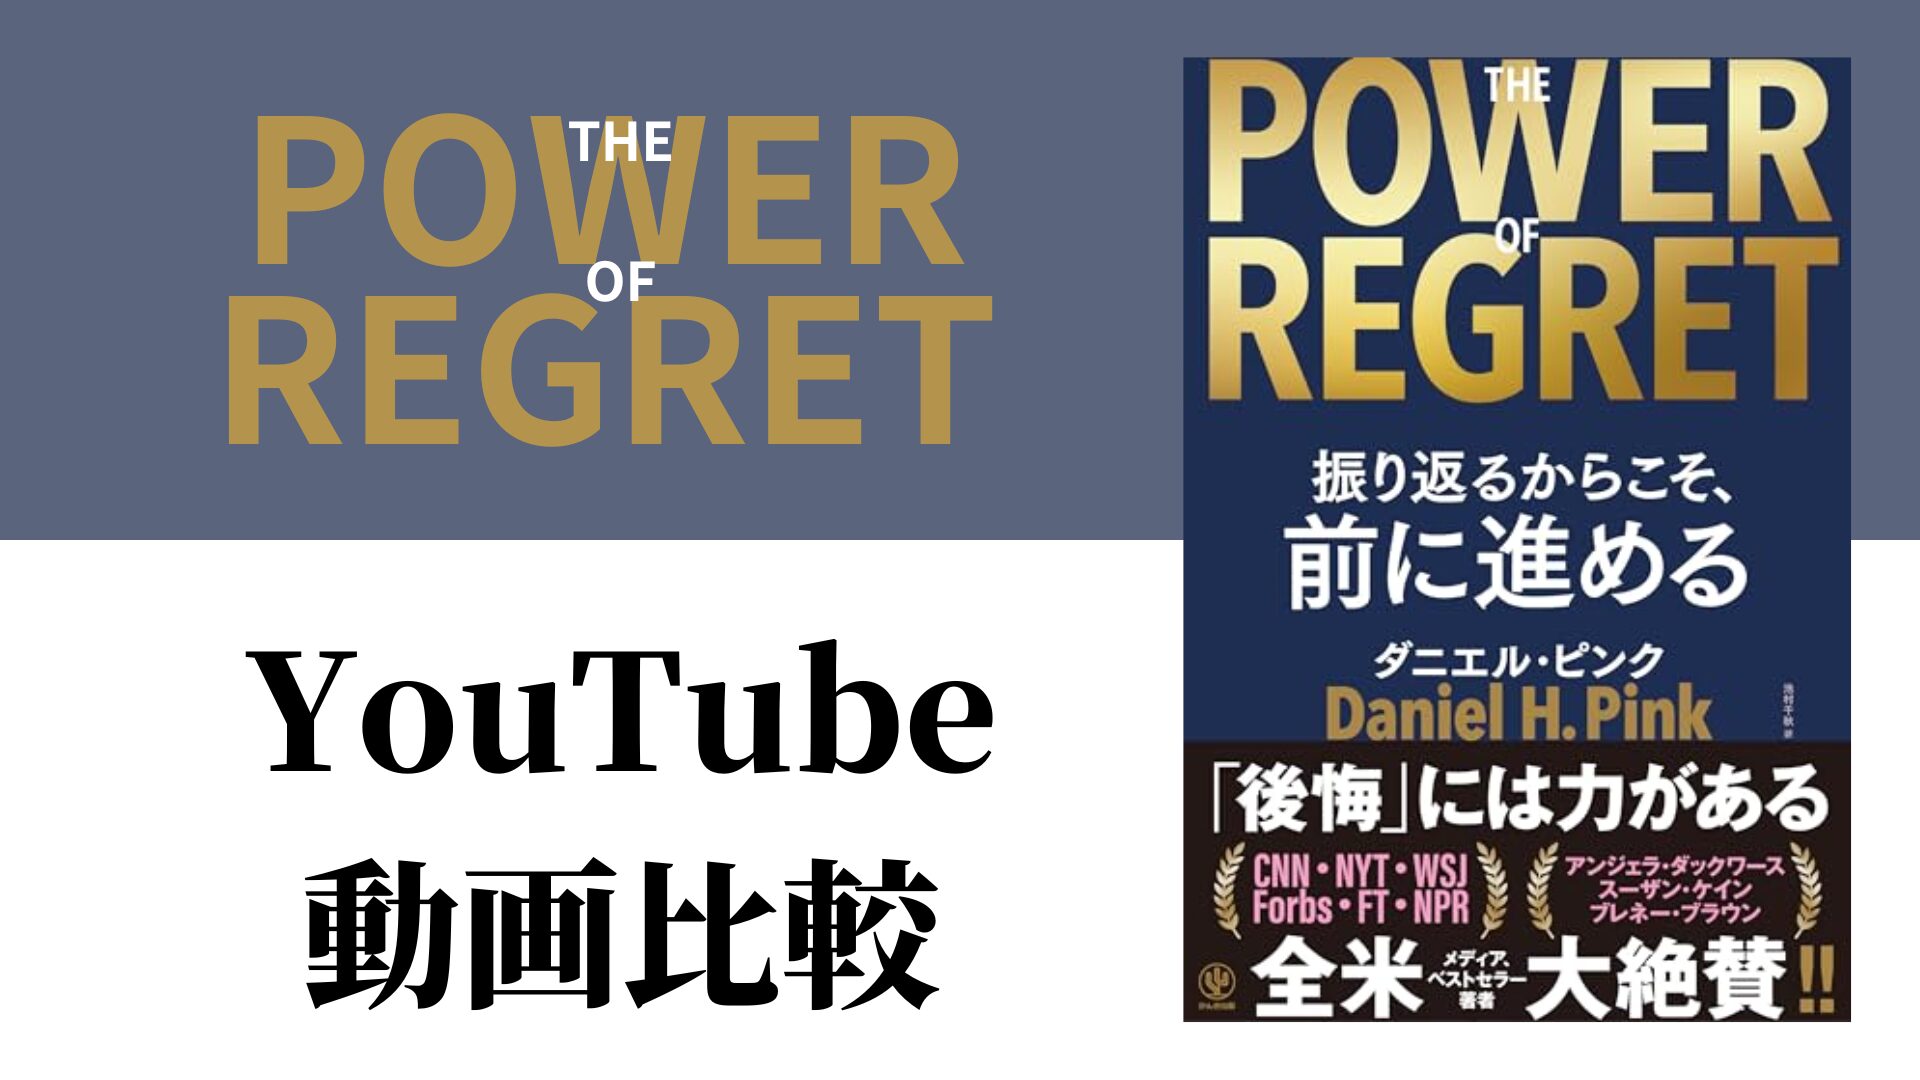 THE POWER OF REGRET YouTube動画比較（スマホ対応）